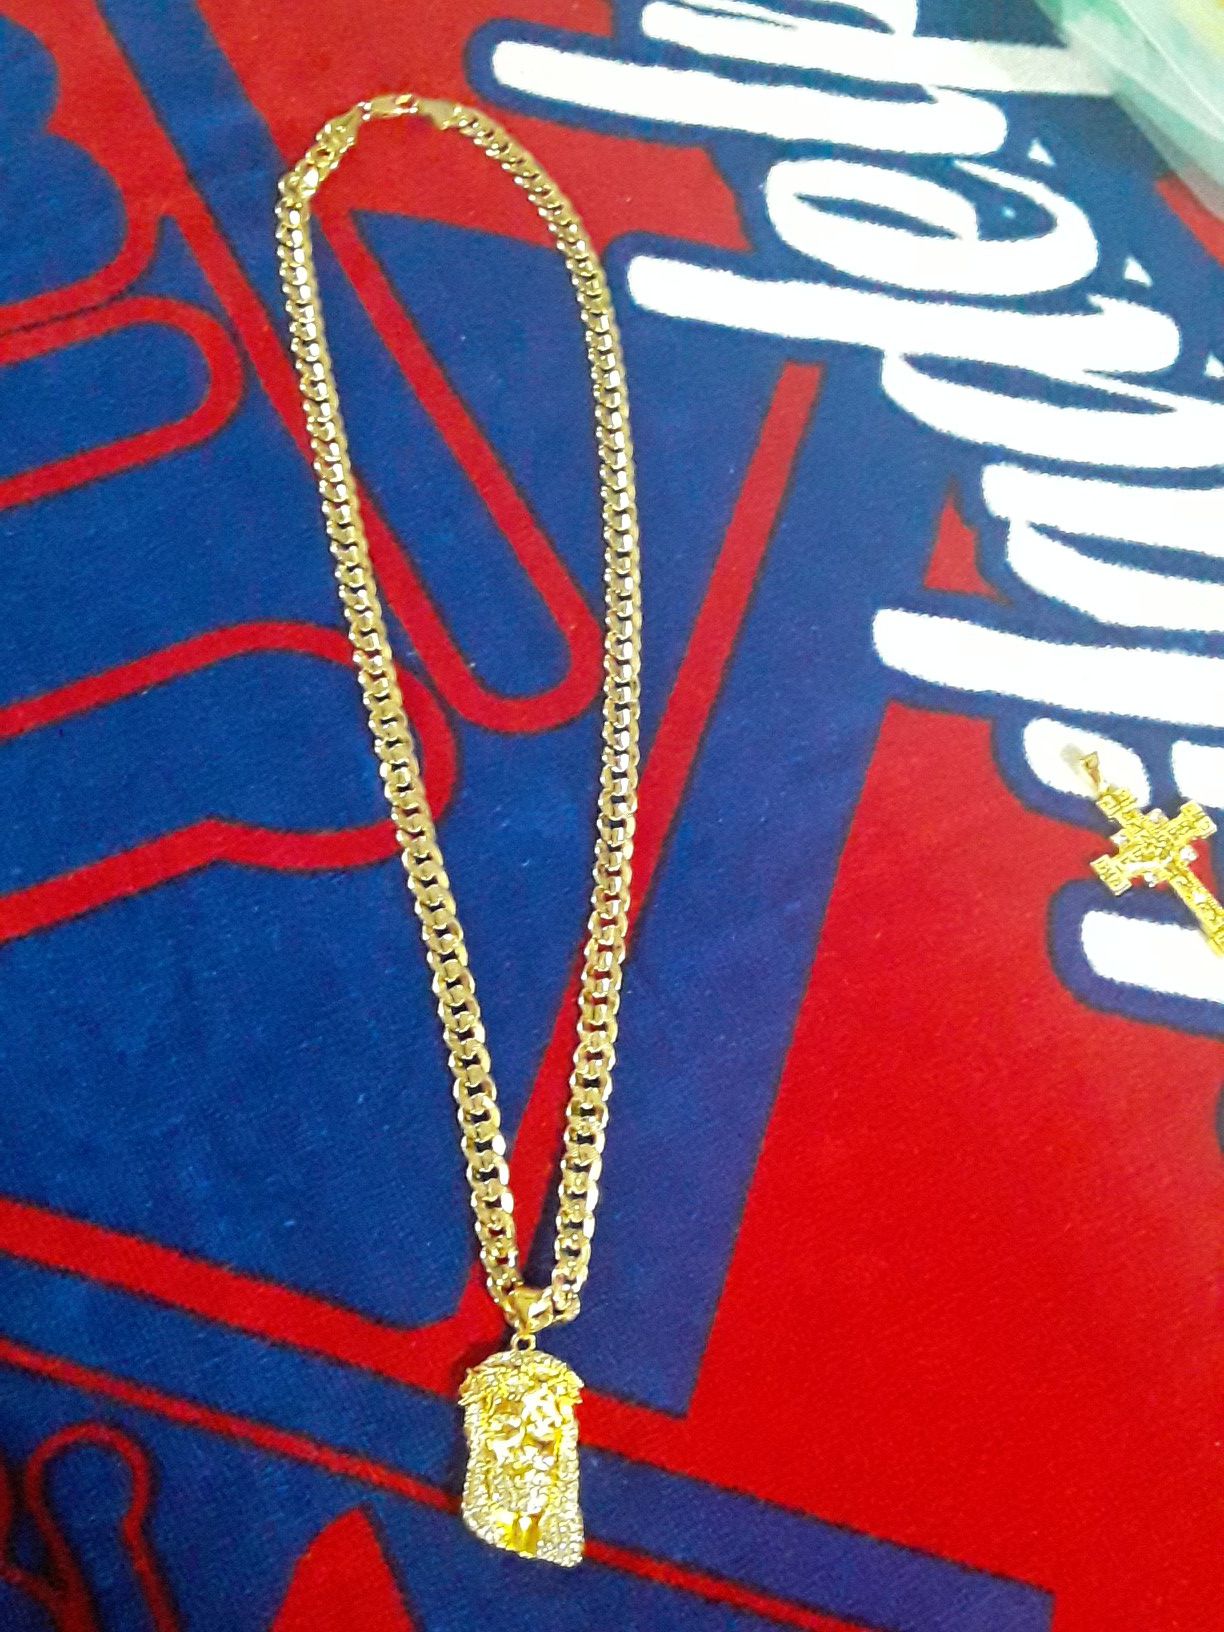 30 inch 14kt stamped gold plated miami cuban link chain rare style diamond sparkle chain with good size gold plated cz jesus . Great qual 275 obo